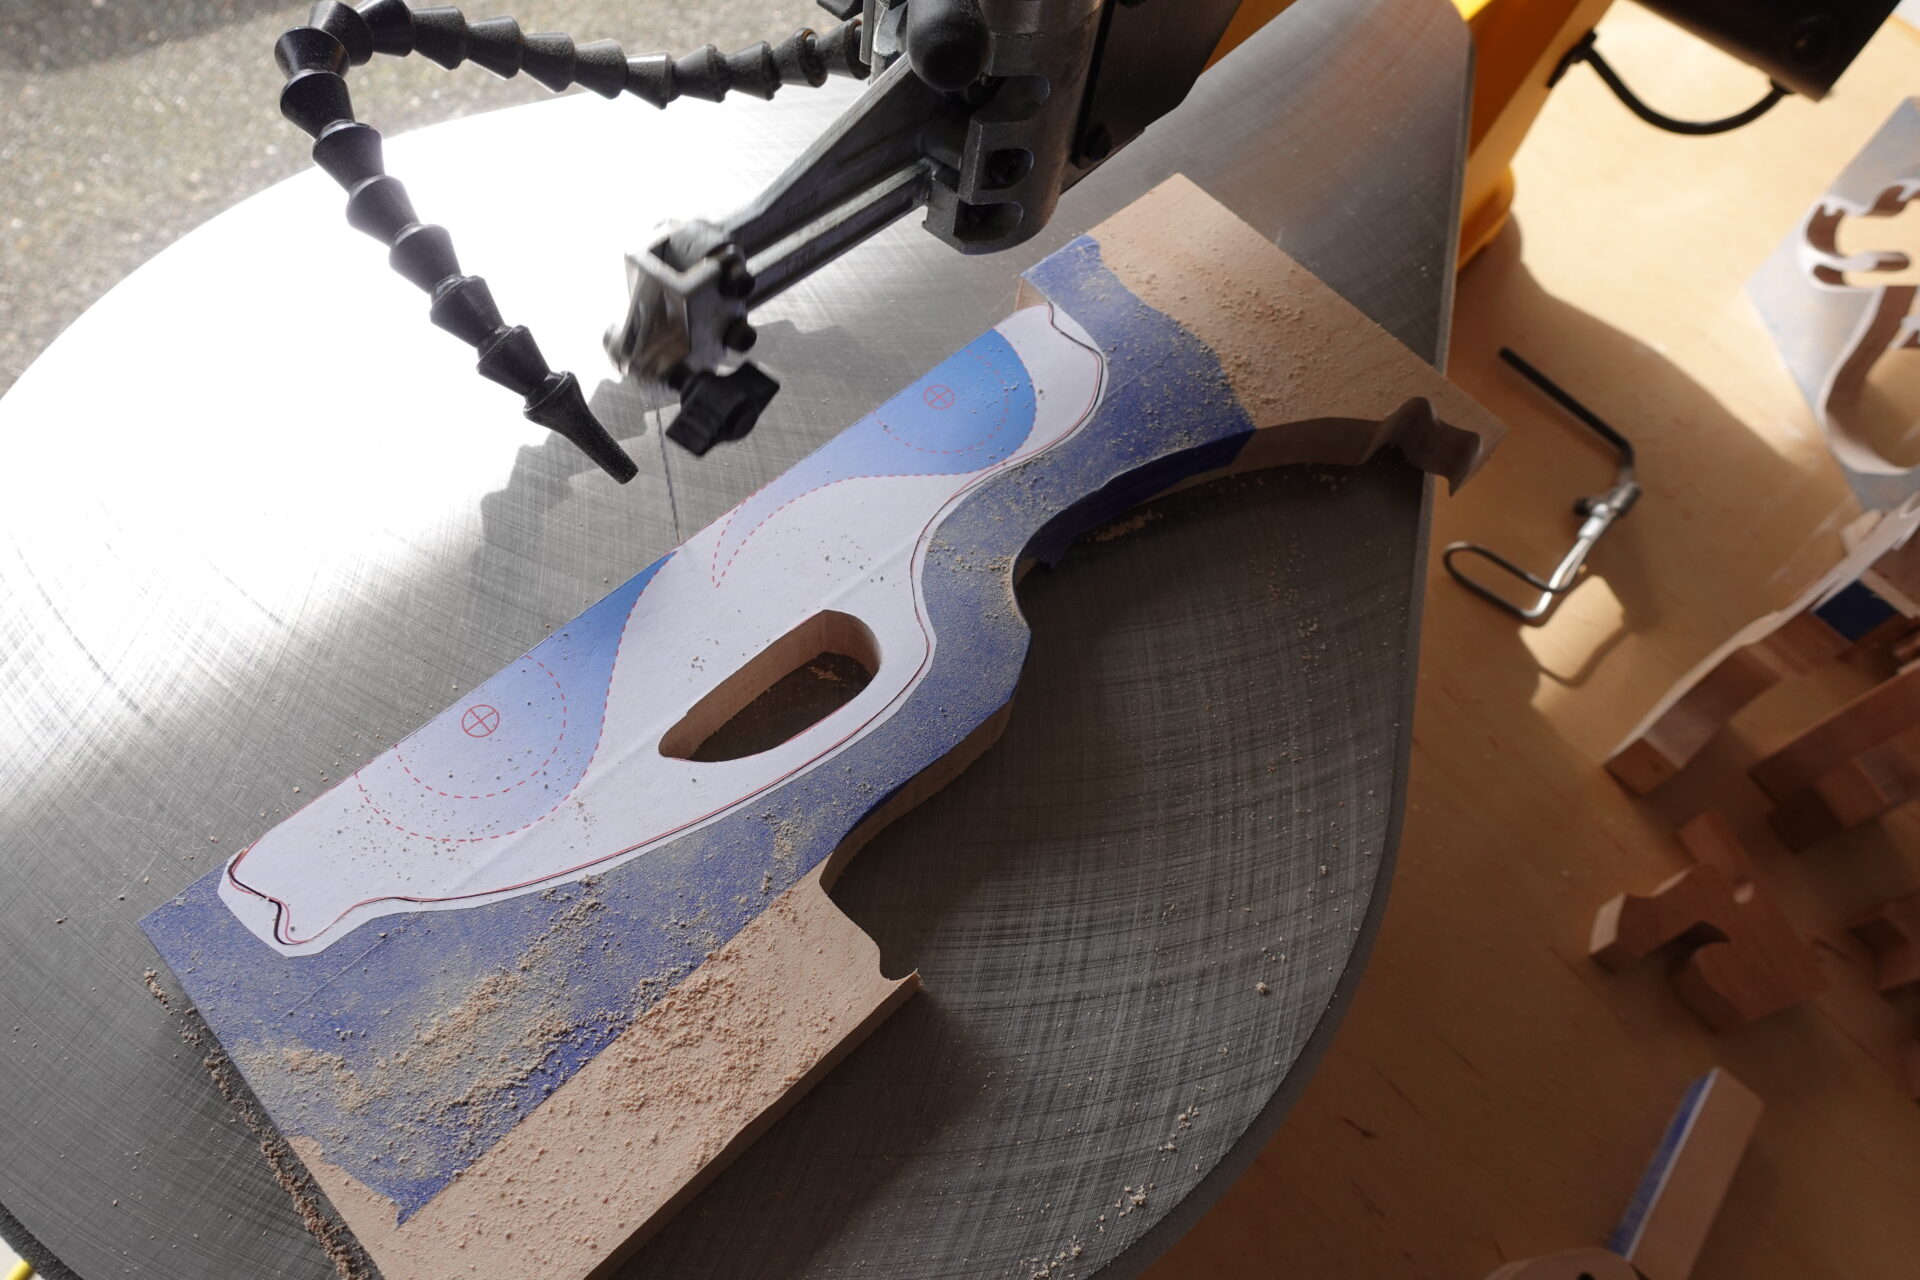 Cut out the remaining pieces using a scroll saw